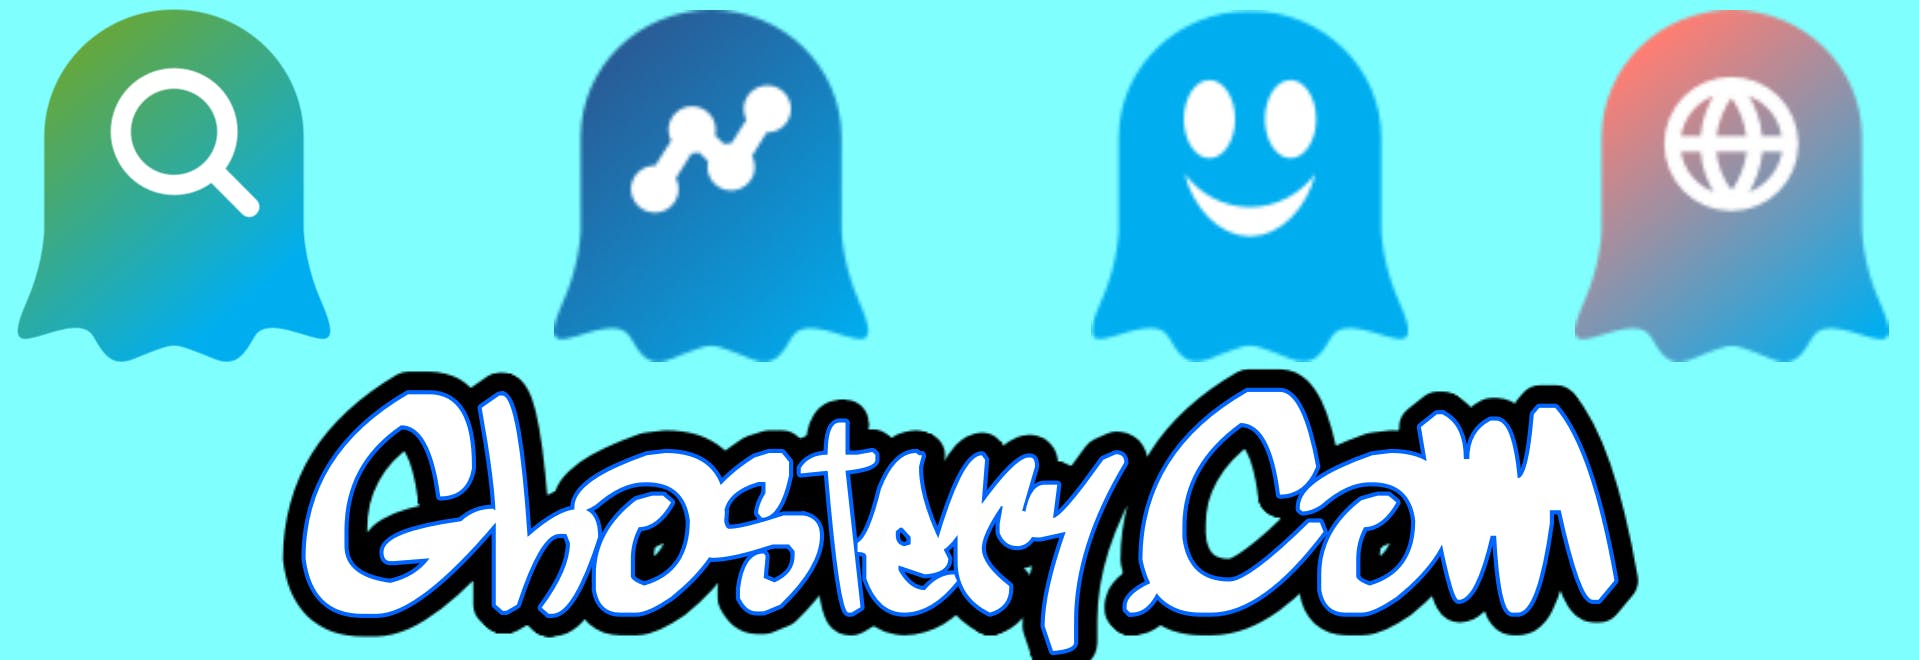 New Look | Same Ghostery Protection & More!